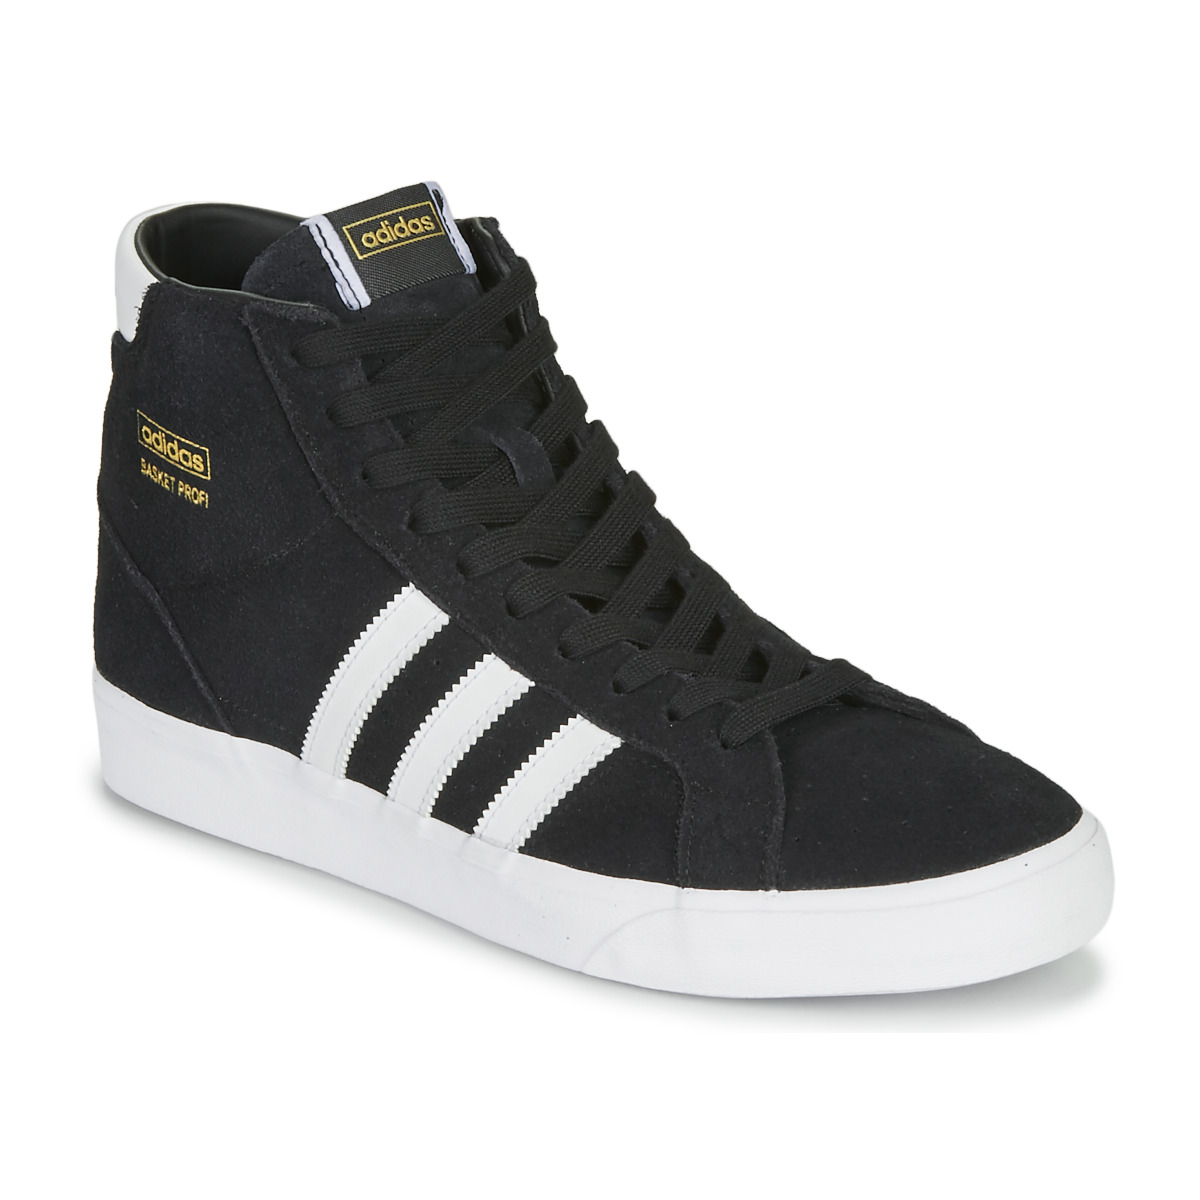 Give sarcoma Plumber adidas Originals BASKET PROFI Black - Fast delivery | Spartoo Europe ! -  Shoes High top trainers 72,00 €